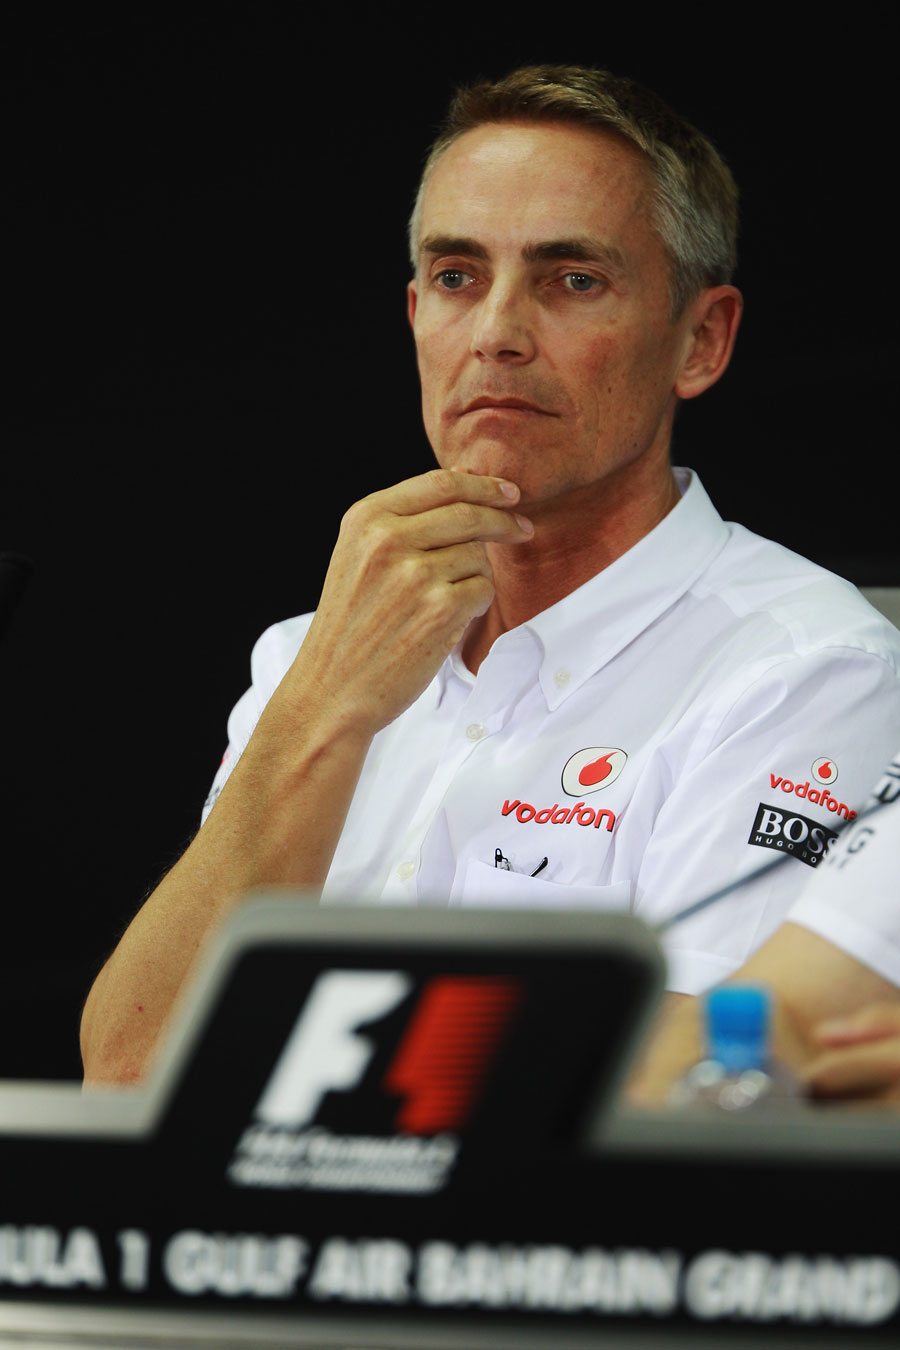 Martin Whitmarsh stares in to the middle distance during the FIA press conference on Friday